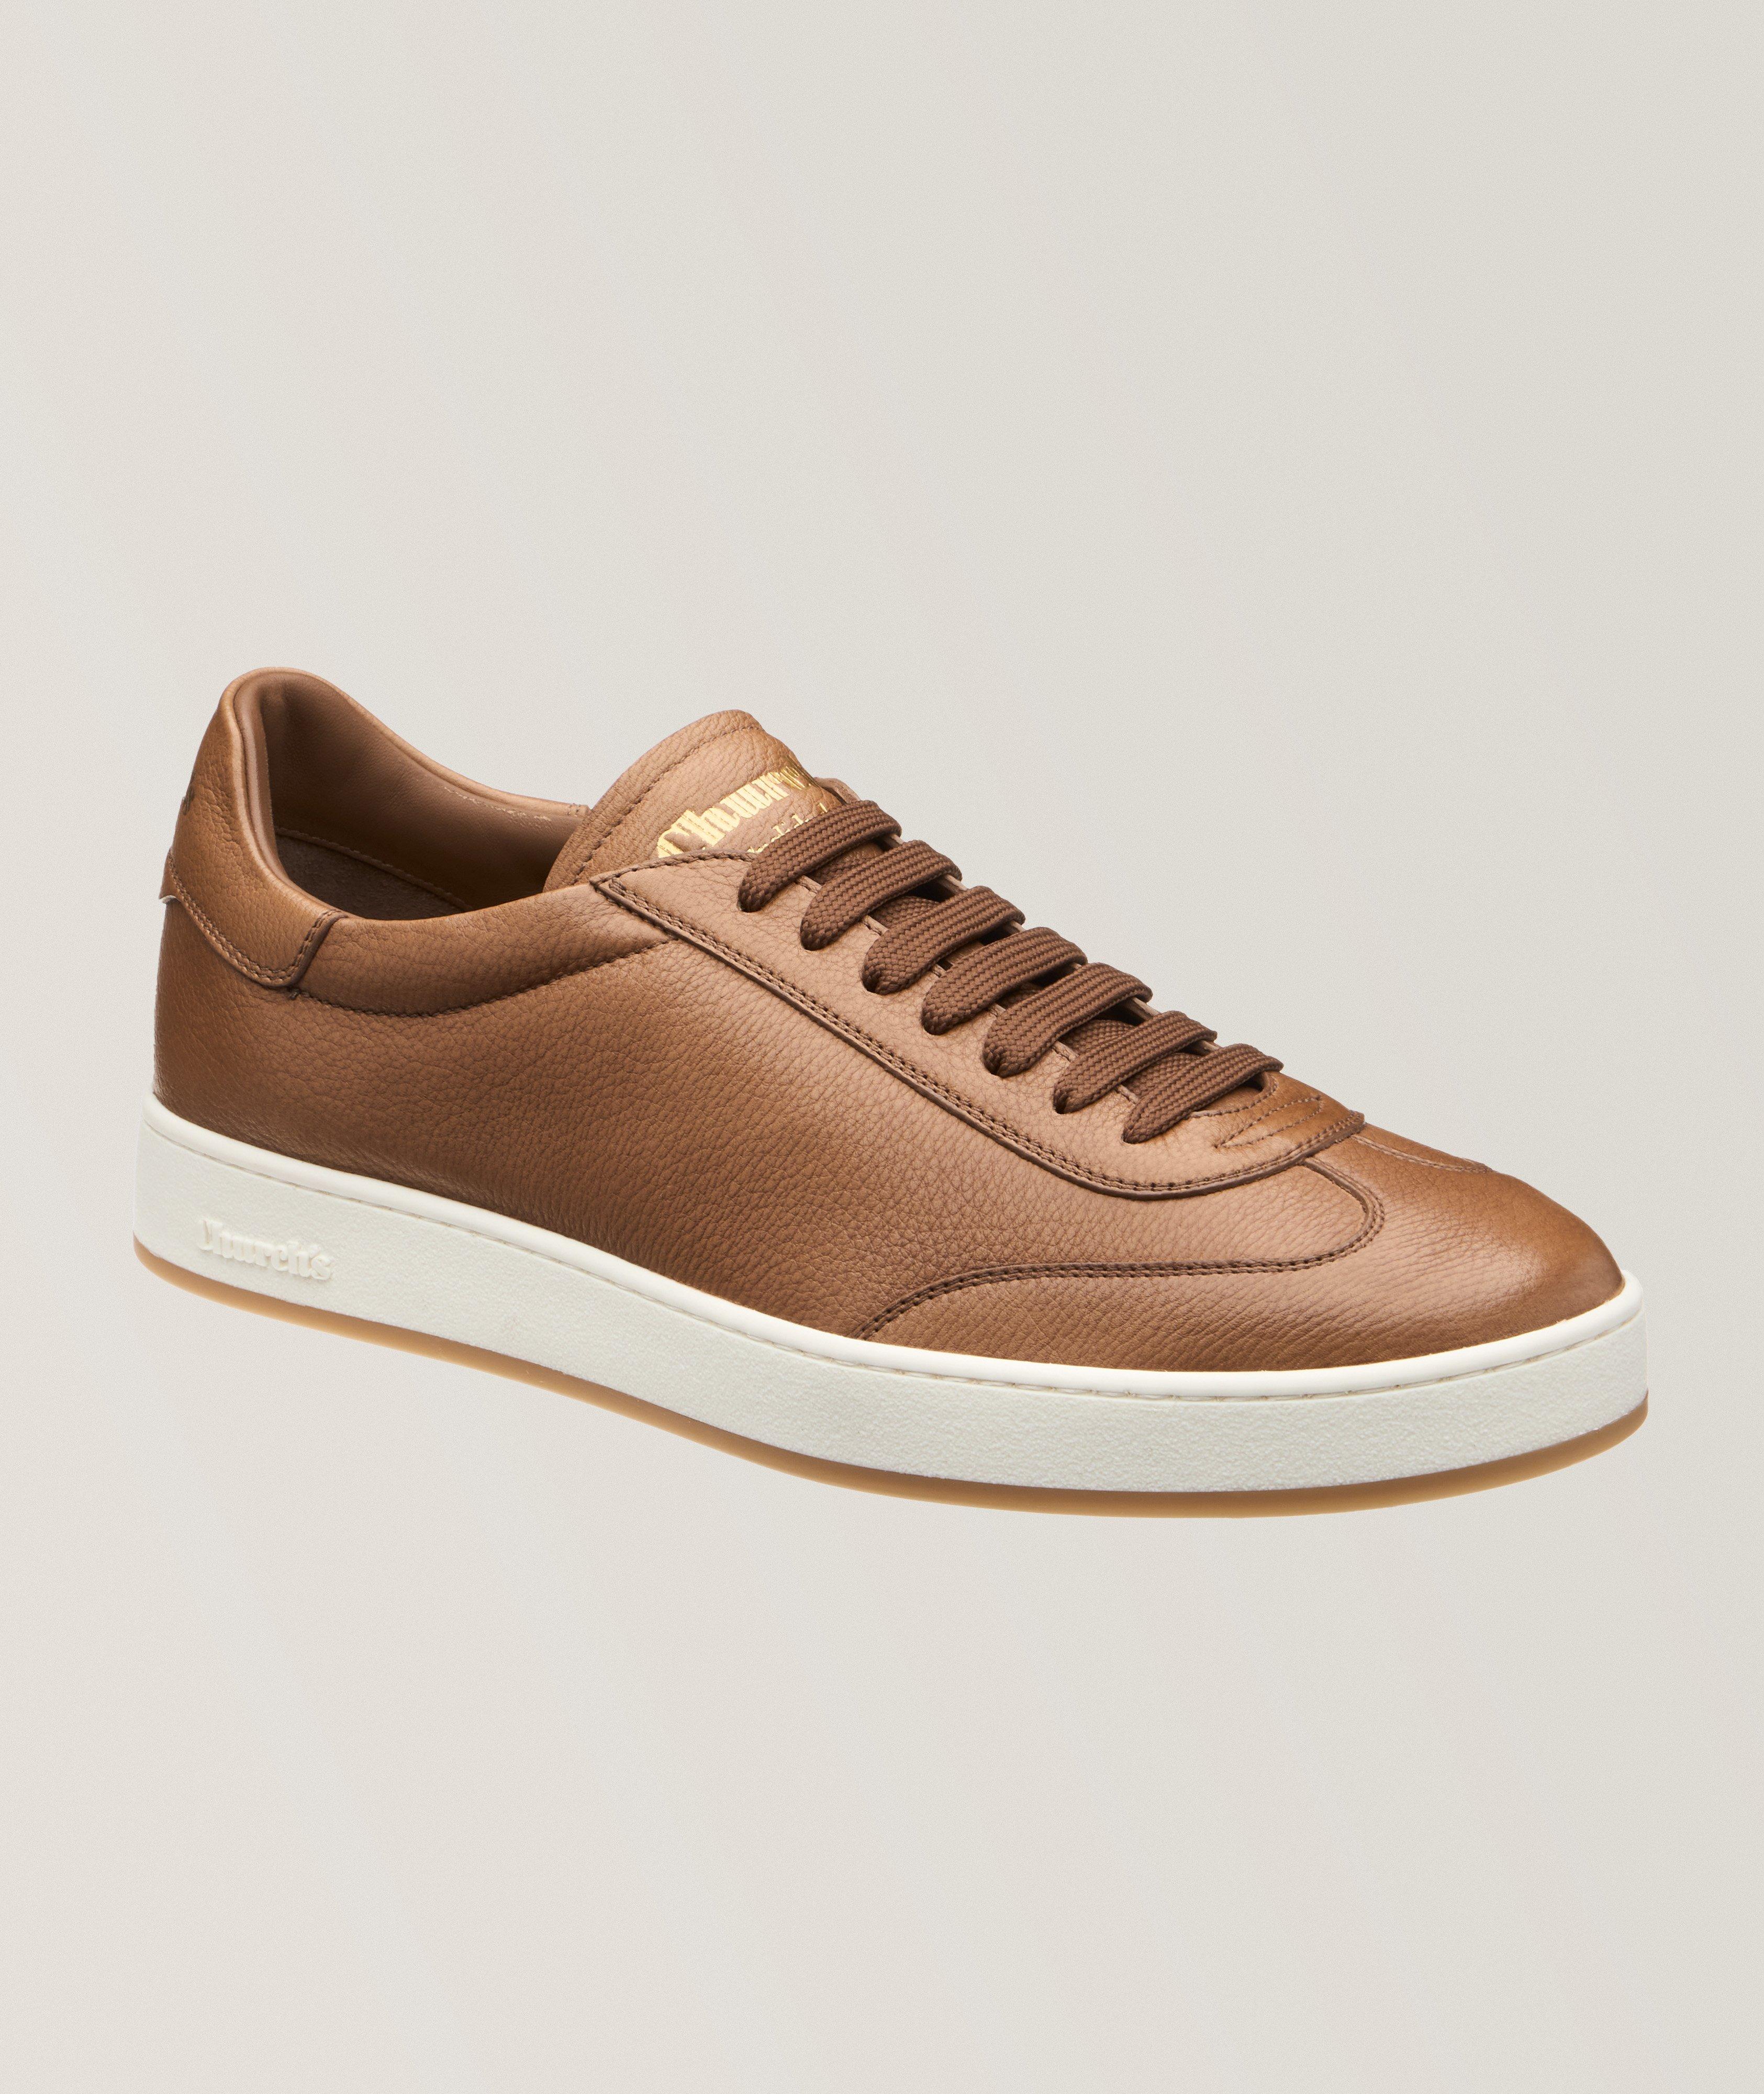 Largs Leather Sneakers image 0